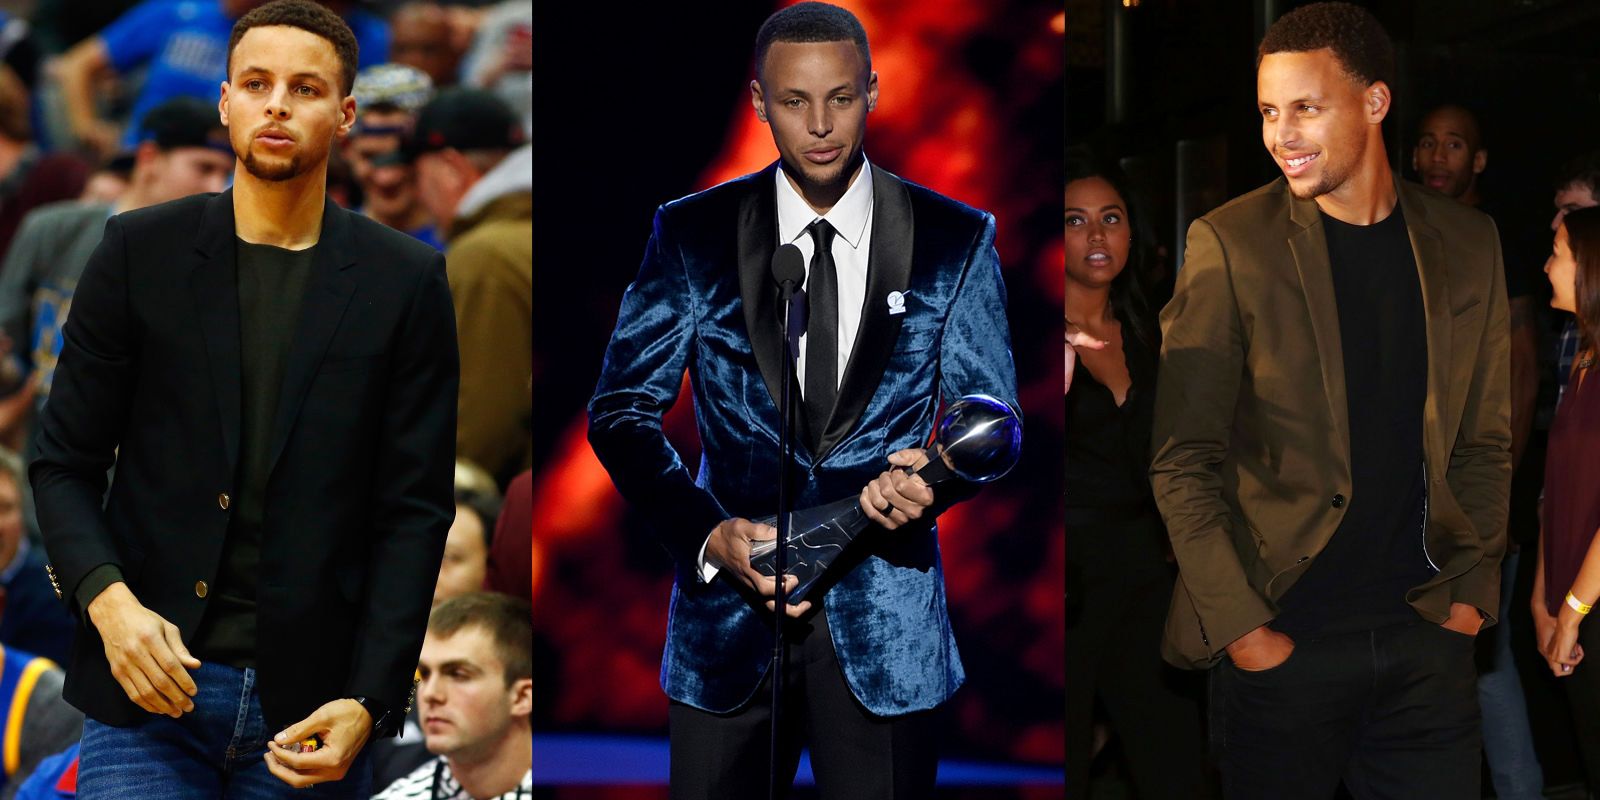 The 11 Best-Dressed NBA All-Star Players - Mandatory